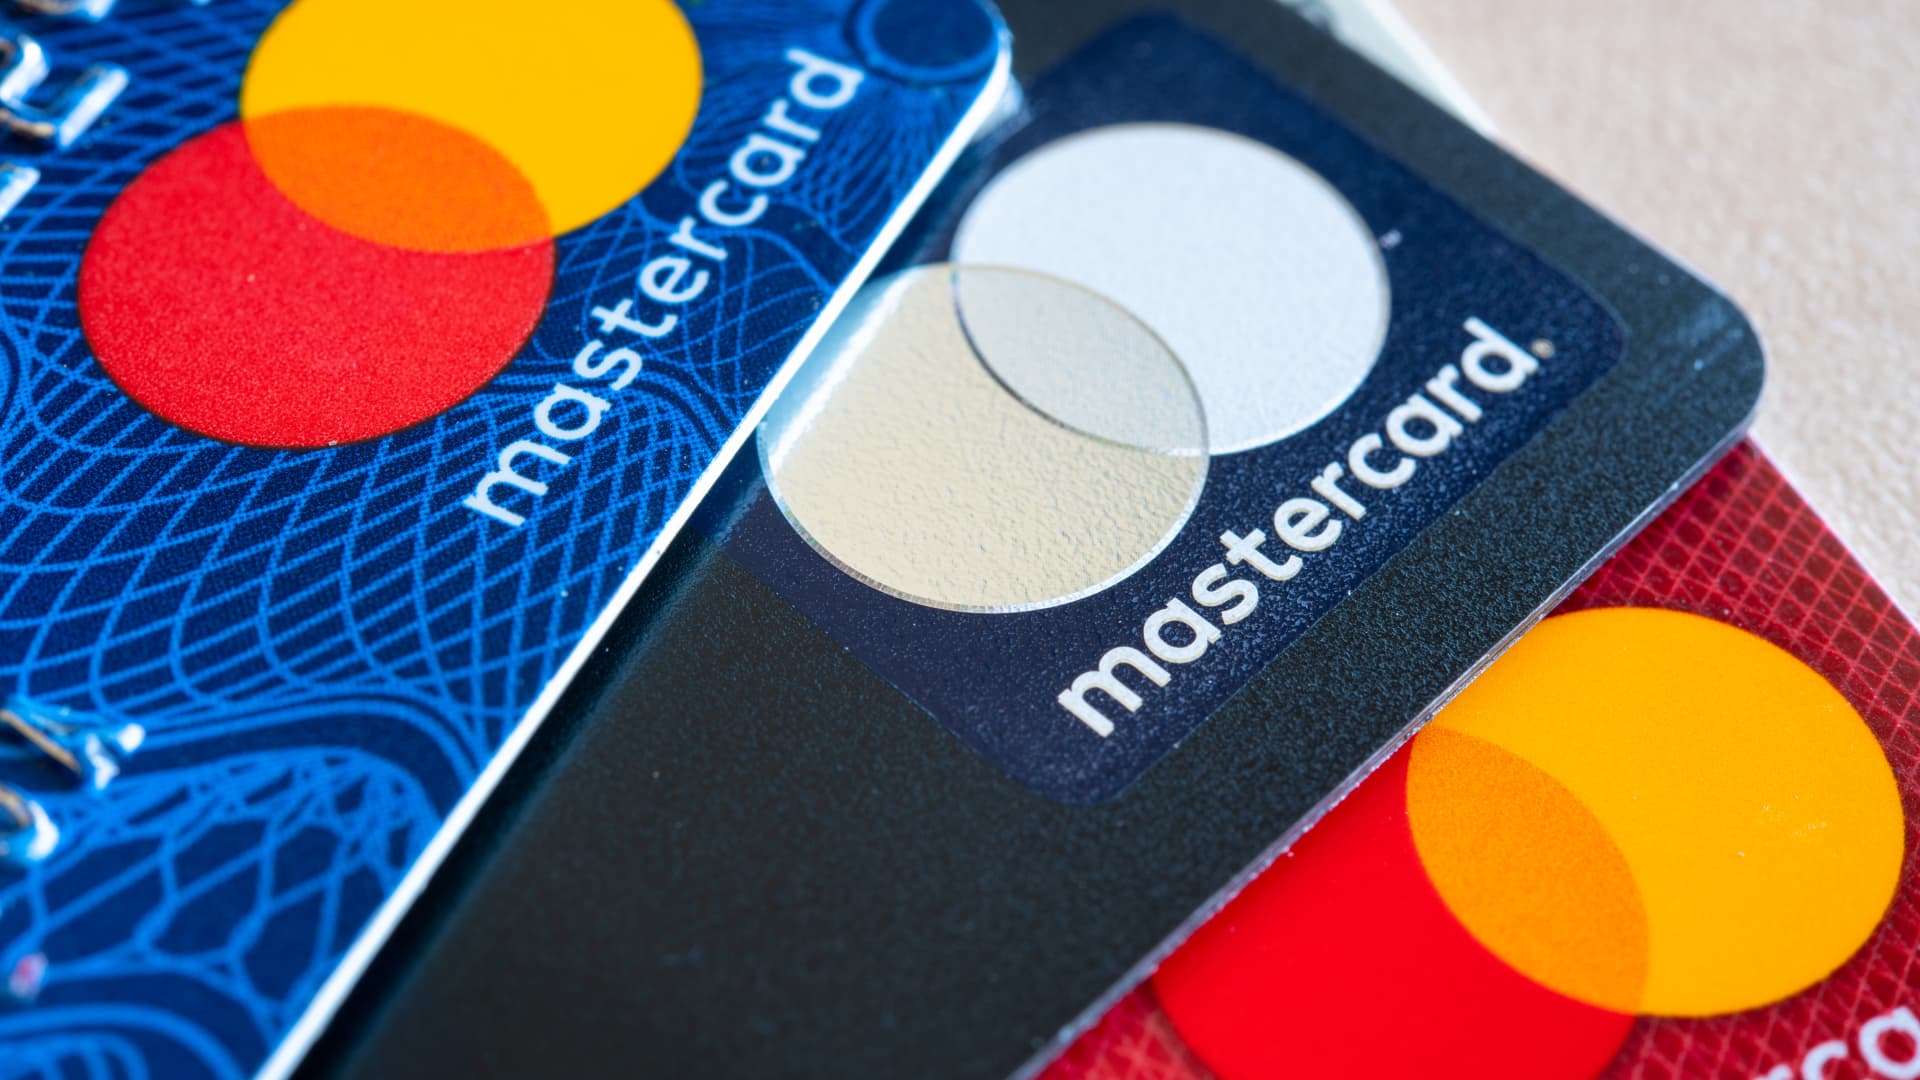 Mastercard deepens crypto push with tool for preventing fraud